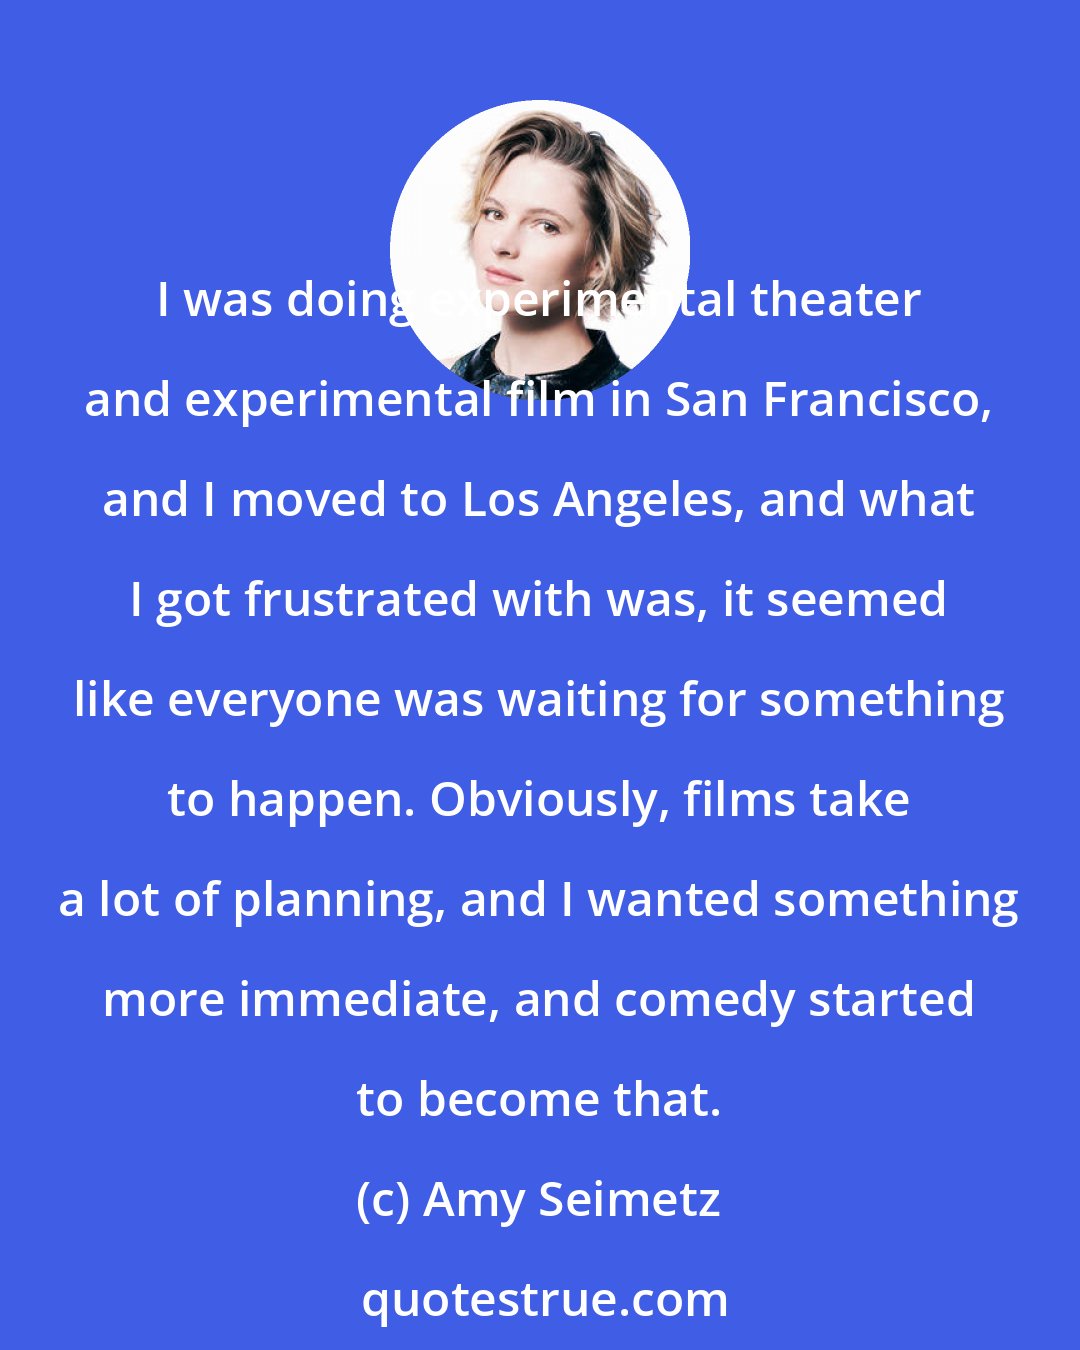 Amy Seimetz: I was doing experimental theater and experimental film in San Francisco, and I moved to Los Angeles, and what I got frustrated with was, it seemed like everyone was waiting for something to happen. Obviously, films take a lot of planning, and I wanted something more immediate, and comedy started to become that.